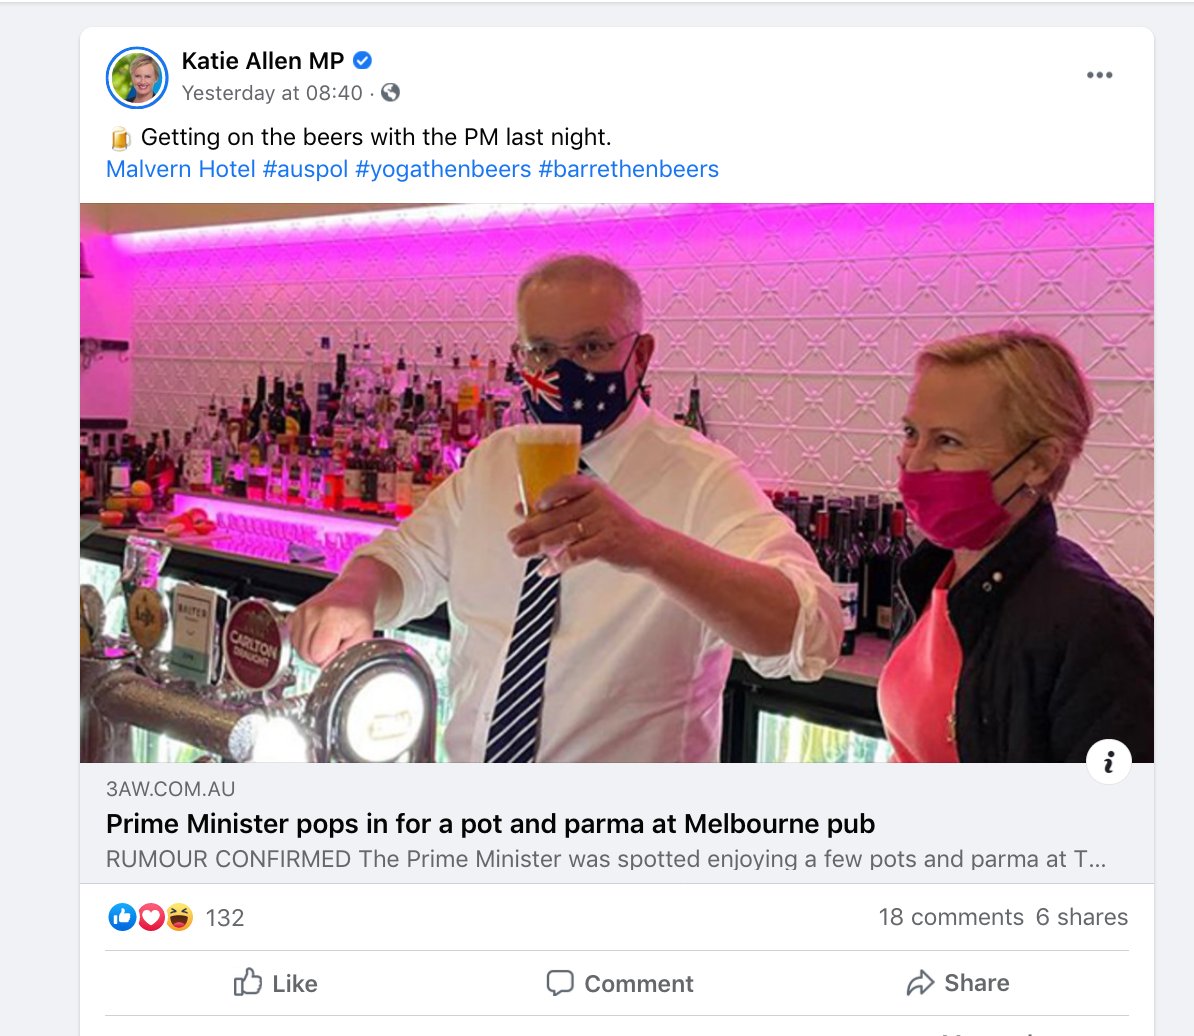 And not just randomly dropped in dear reader, but also happened to have local Lib MP Katie Allen with him. Which is handy because Ms Allen is a doctor and the PM was due to speak about . . . A BIG ANNOUNCEMENT!So it's just as well Ms Allen randomly posted the photo as well.